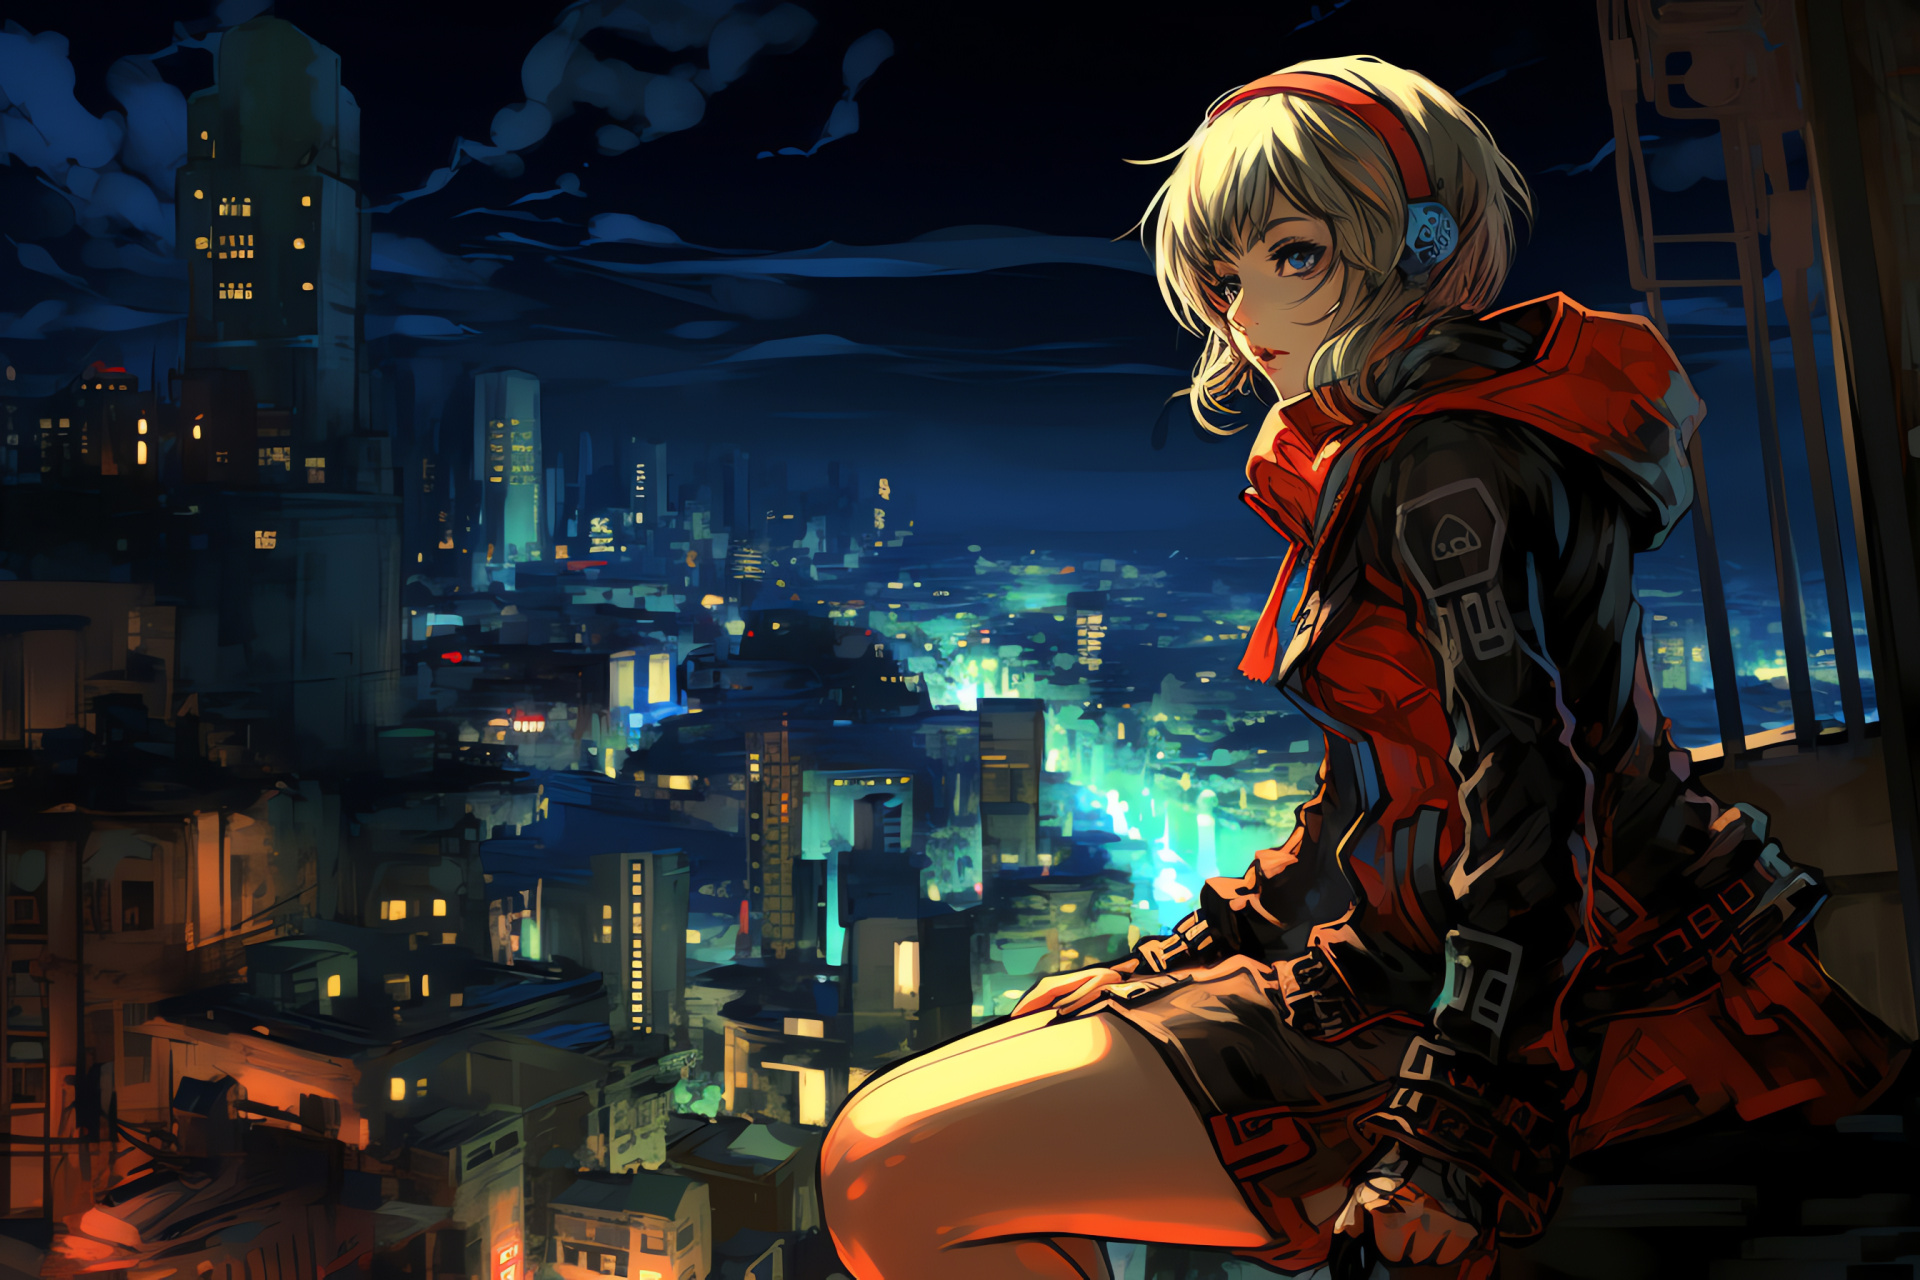 Persona 3 scenery, SEES group, Metropolis twilight, Neon city luminescence, Role-playing setting, HD Desktop Wallpaper